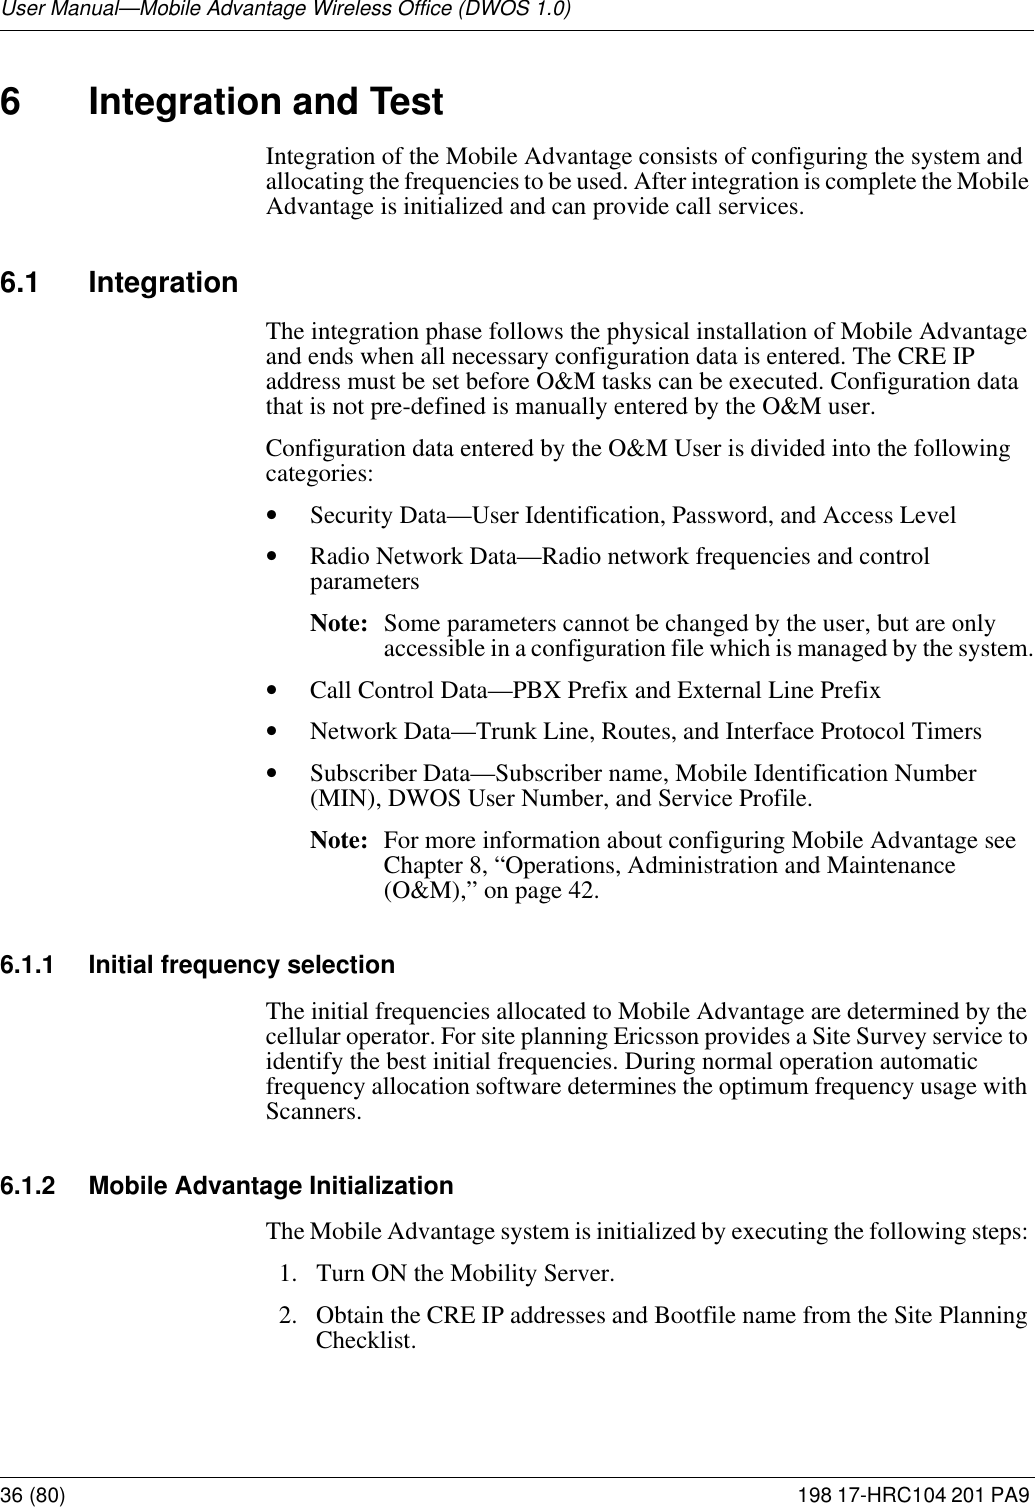 User Manual—Mobile Advantage Wireless Office (DWOS 1.0)36 (80) 198 17-HRC104 201 PA9 6 Integration and TestIntegration of the Mobile Advantage consists of configuring the system and allocating the frequencies to be used. After integration is complete the Mobile Advantage is initialized and can provide call services.6.1 Integration The integration phase follows the physical installation of Mobile Advantage and ends when all necessary configuration data is entered. The CRE IP address must be set before O&amp;M tasks can be executed. Configuration data that is not pre-defined is manually entered by the O&amp;M user.Configuration data entered by the O&amp;M User is divided into the following categories: •Security Data—User Identification, Password, and Access Level•Radio Network Data—Radio network frequencies and control parametersNote: Some parameters cannot be changed by the user, but are only accessible in a configuration file which is managed by the system.•Call Control Data—PBX Prefix and External Line Prefix•Network Data—Trunk Line, Routes, and Interface Protocol Timers•Subscriber Data—Subscriber name, Mobile Identification Number (MIN), DWOS User Number, and Service Profile.Note: For more information about configuring Mobile Advantage see Chapter 8, “Operations, Administration and Maintenance (O&amp;M),” on page 42.6.1.1 Initial frequency selectionThe initial frequencies allocated to Mobile Advantage are determined by the cellular operator. For site planning Ericsson provides a Site Survey service to identify the best initial frequencies. During normal operation automatic frequency allocation software determines the optimum frequency usage with Scanners.6.1.2 Mobile Advantage InitializationThe Mobile Advantage system is initialized by executing the following steps: 1.  Turn ON the Mobility Server. 2.  Obtain the CRE IP addresses and Bootfile name from the Site Planning Checklist.